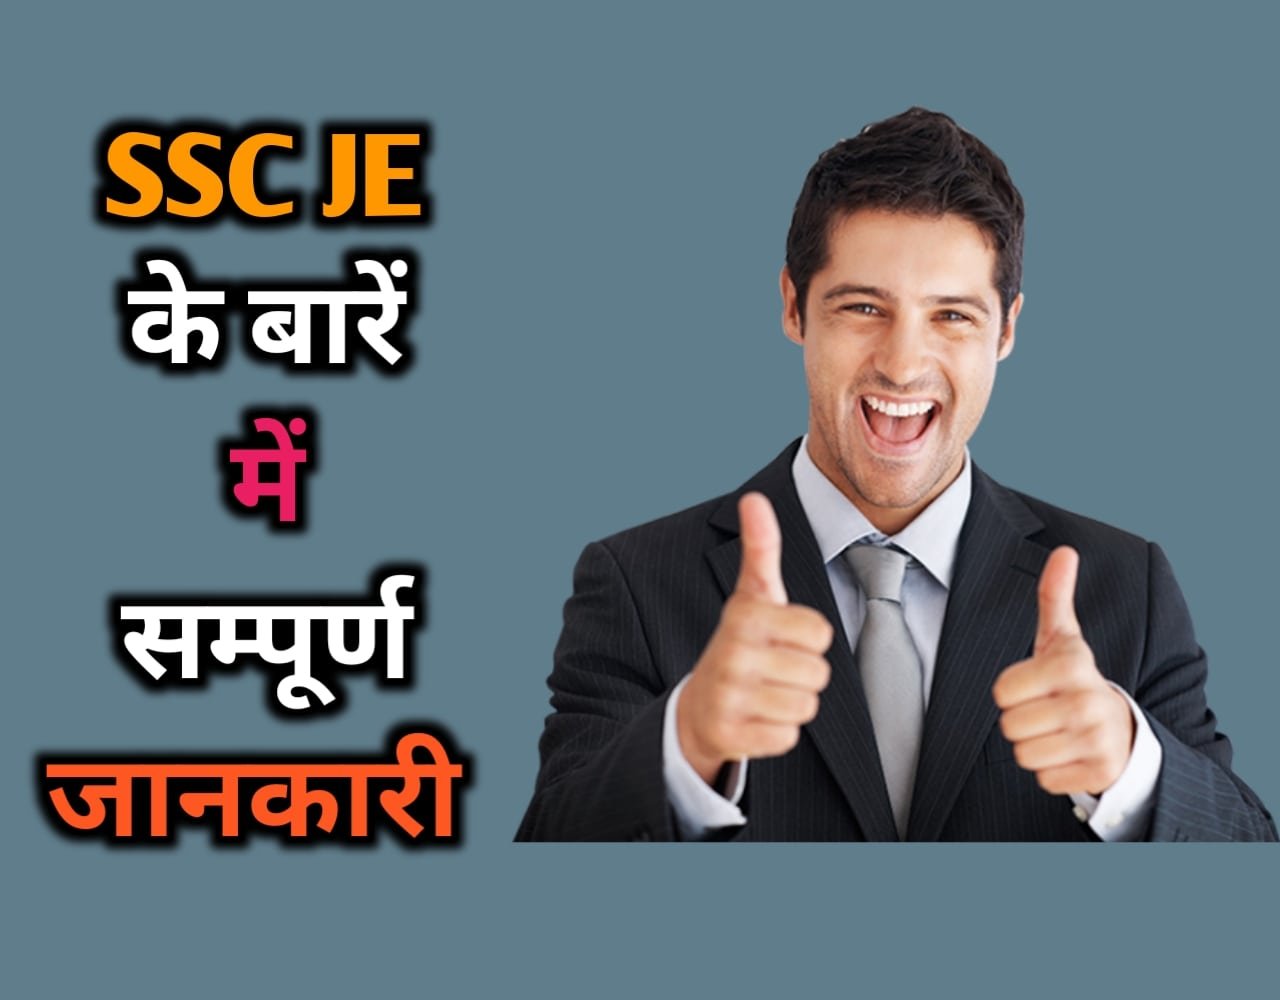 SSC JE Details In Hindi | SSC JE क्या है?